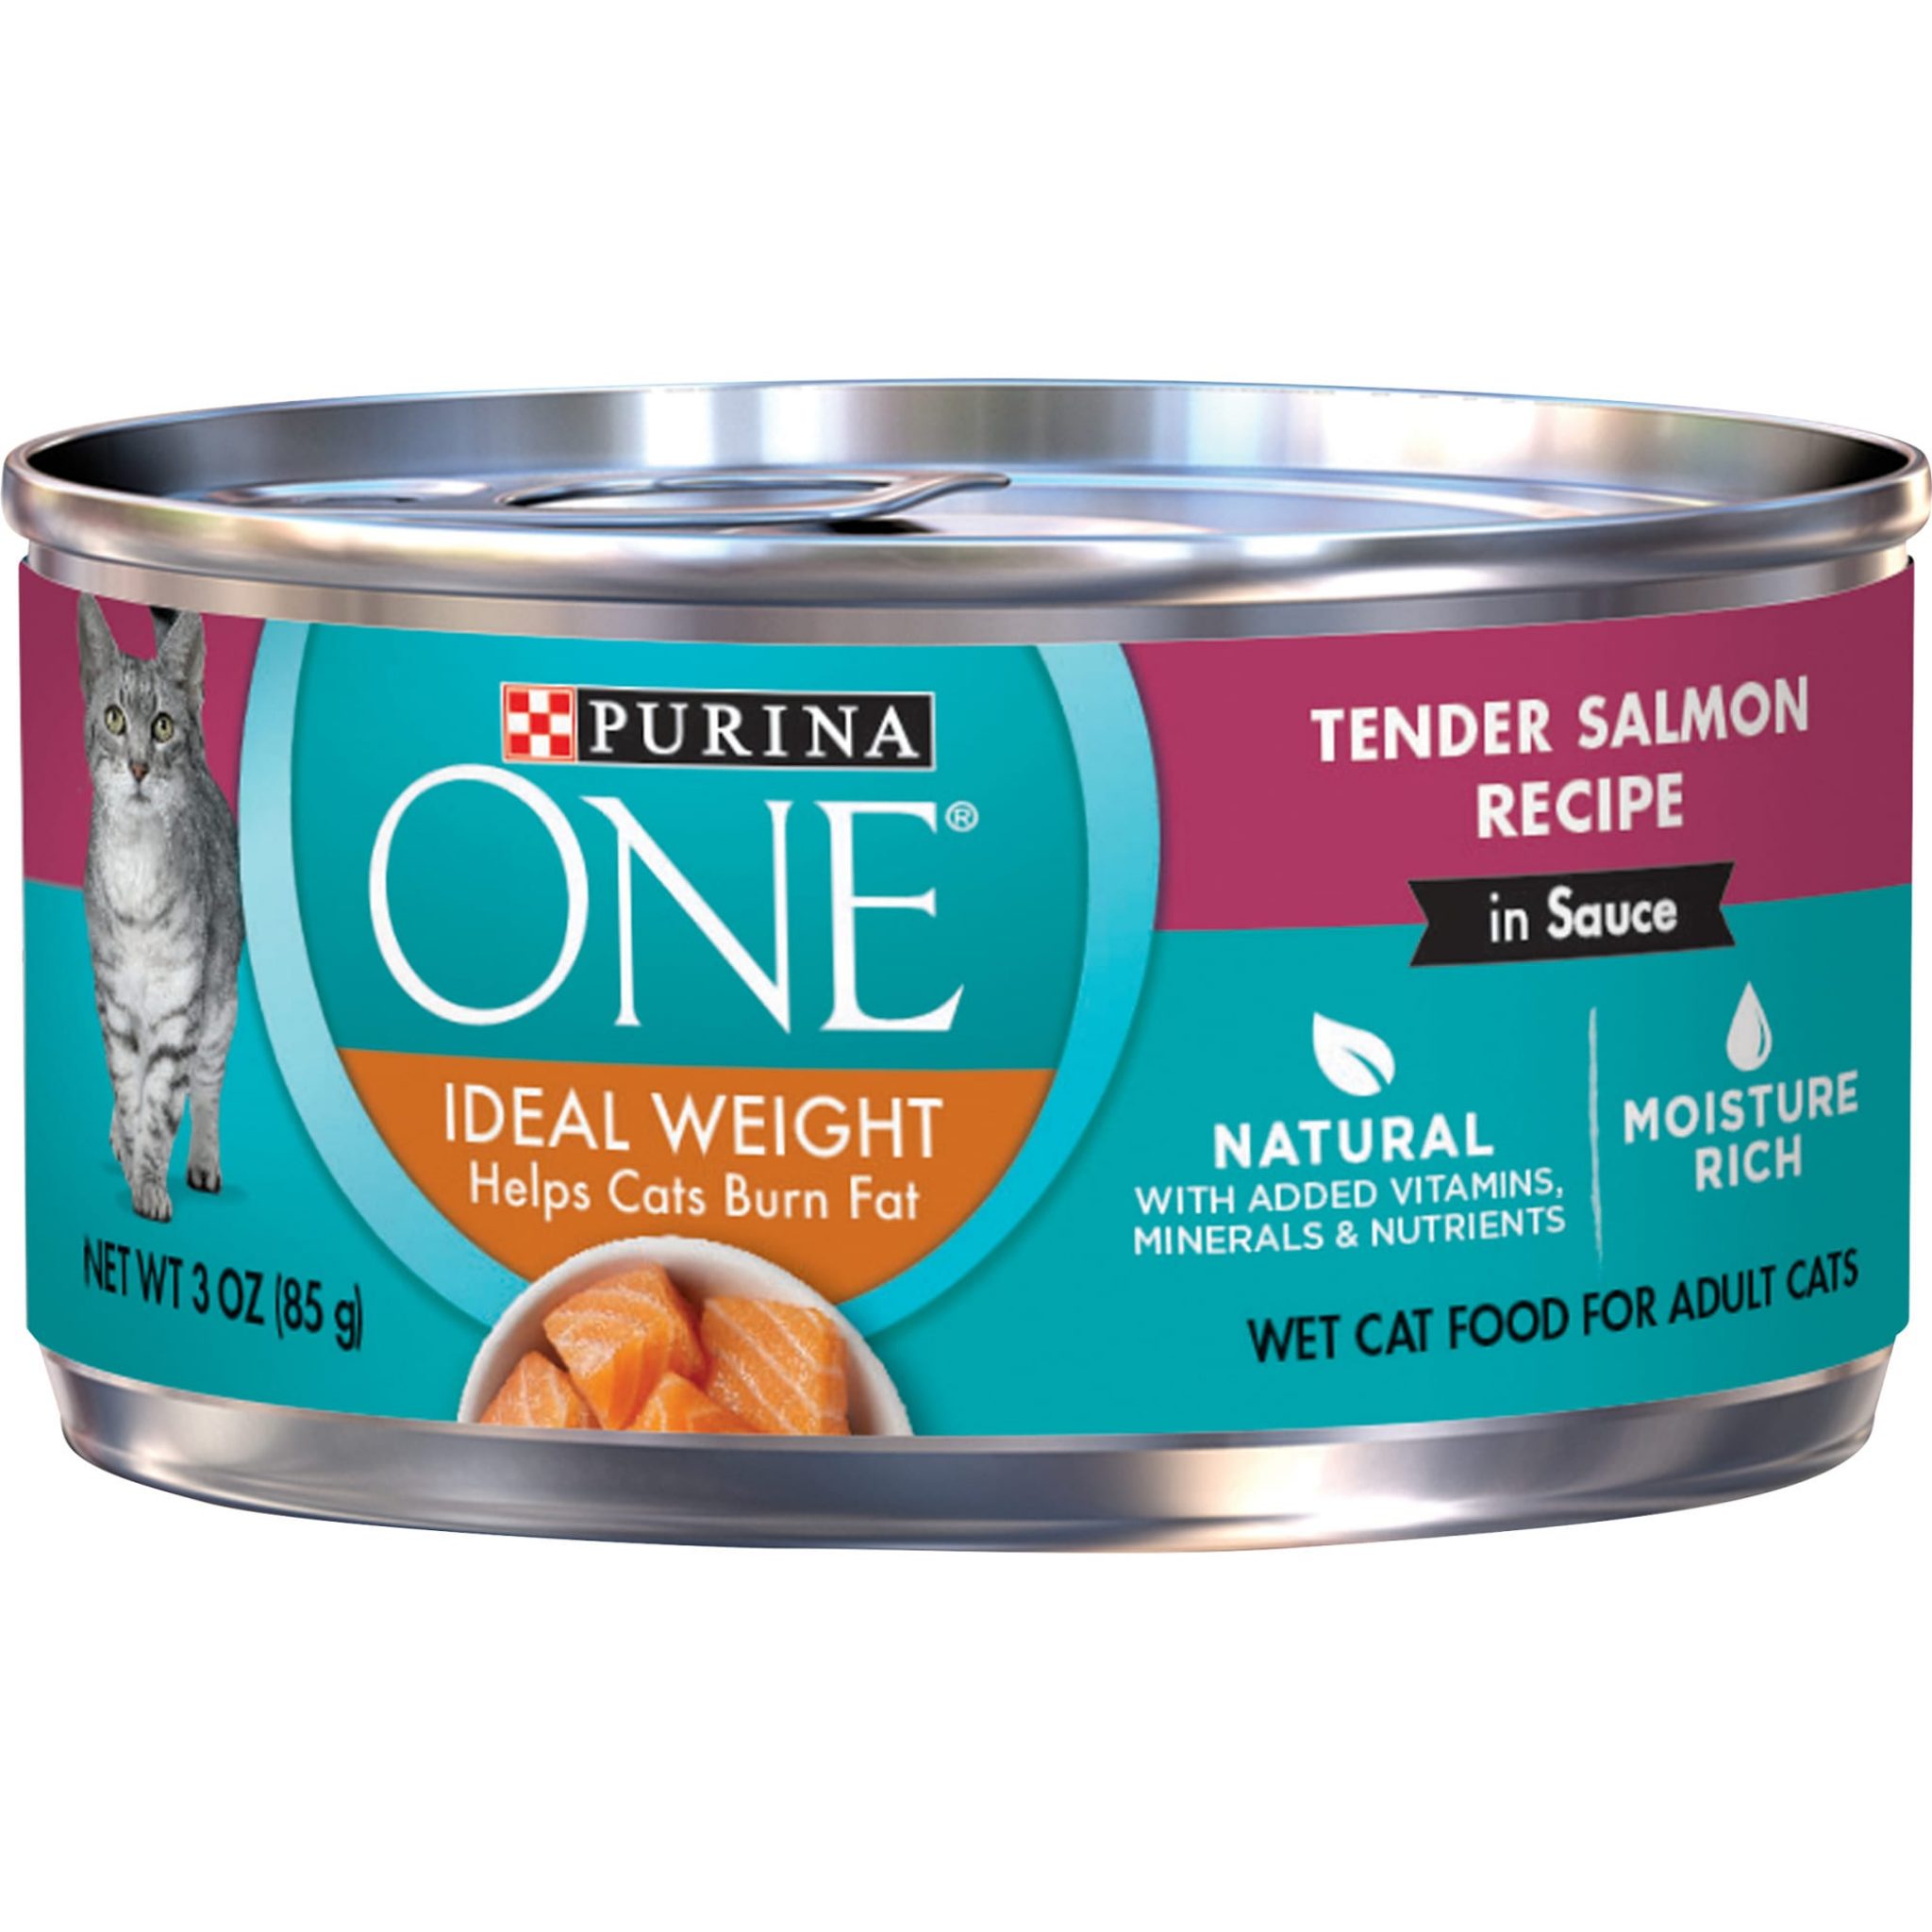 Purina ONE Natural Ideal Weight Tender Salmon Recipe Wet ...